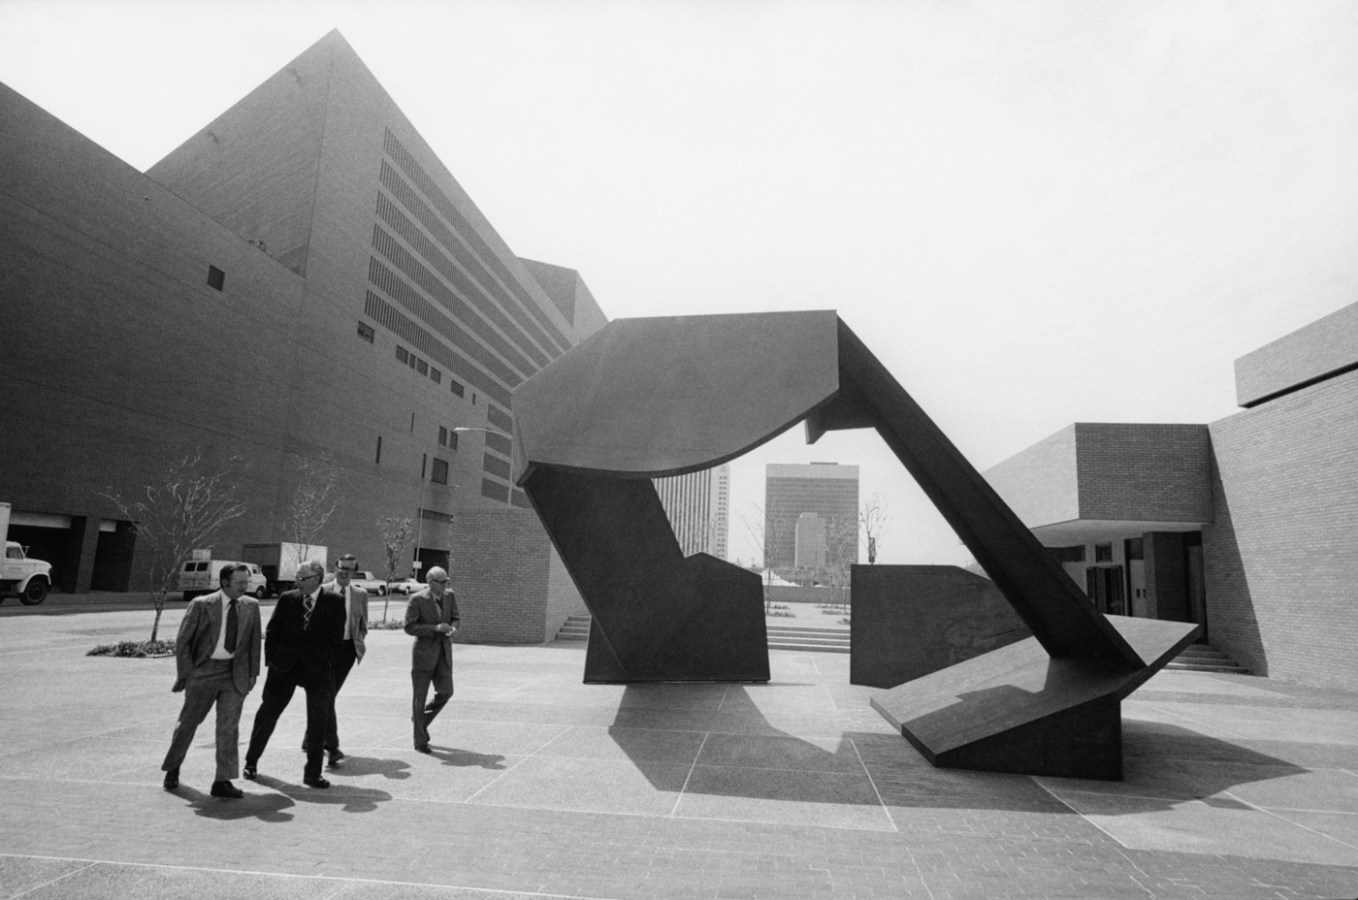 Black-and-white photograph of a group of businessmen passing an empty plaza with a modern geometric sculpture